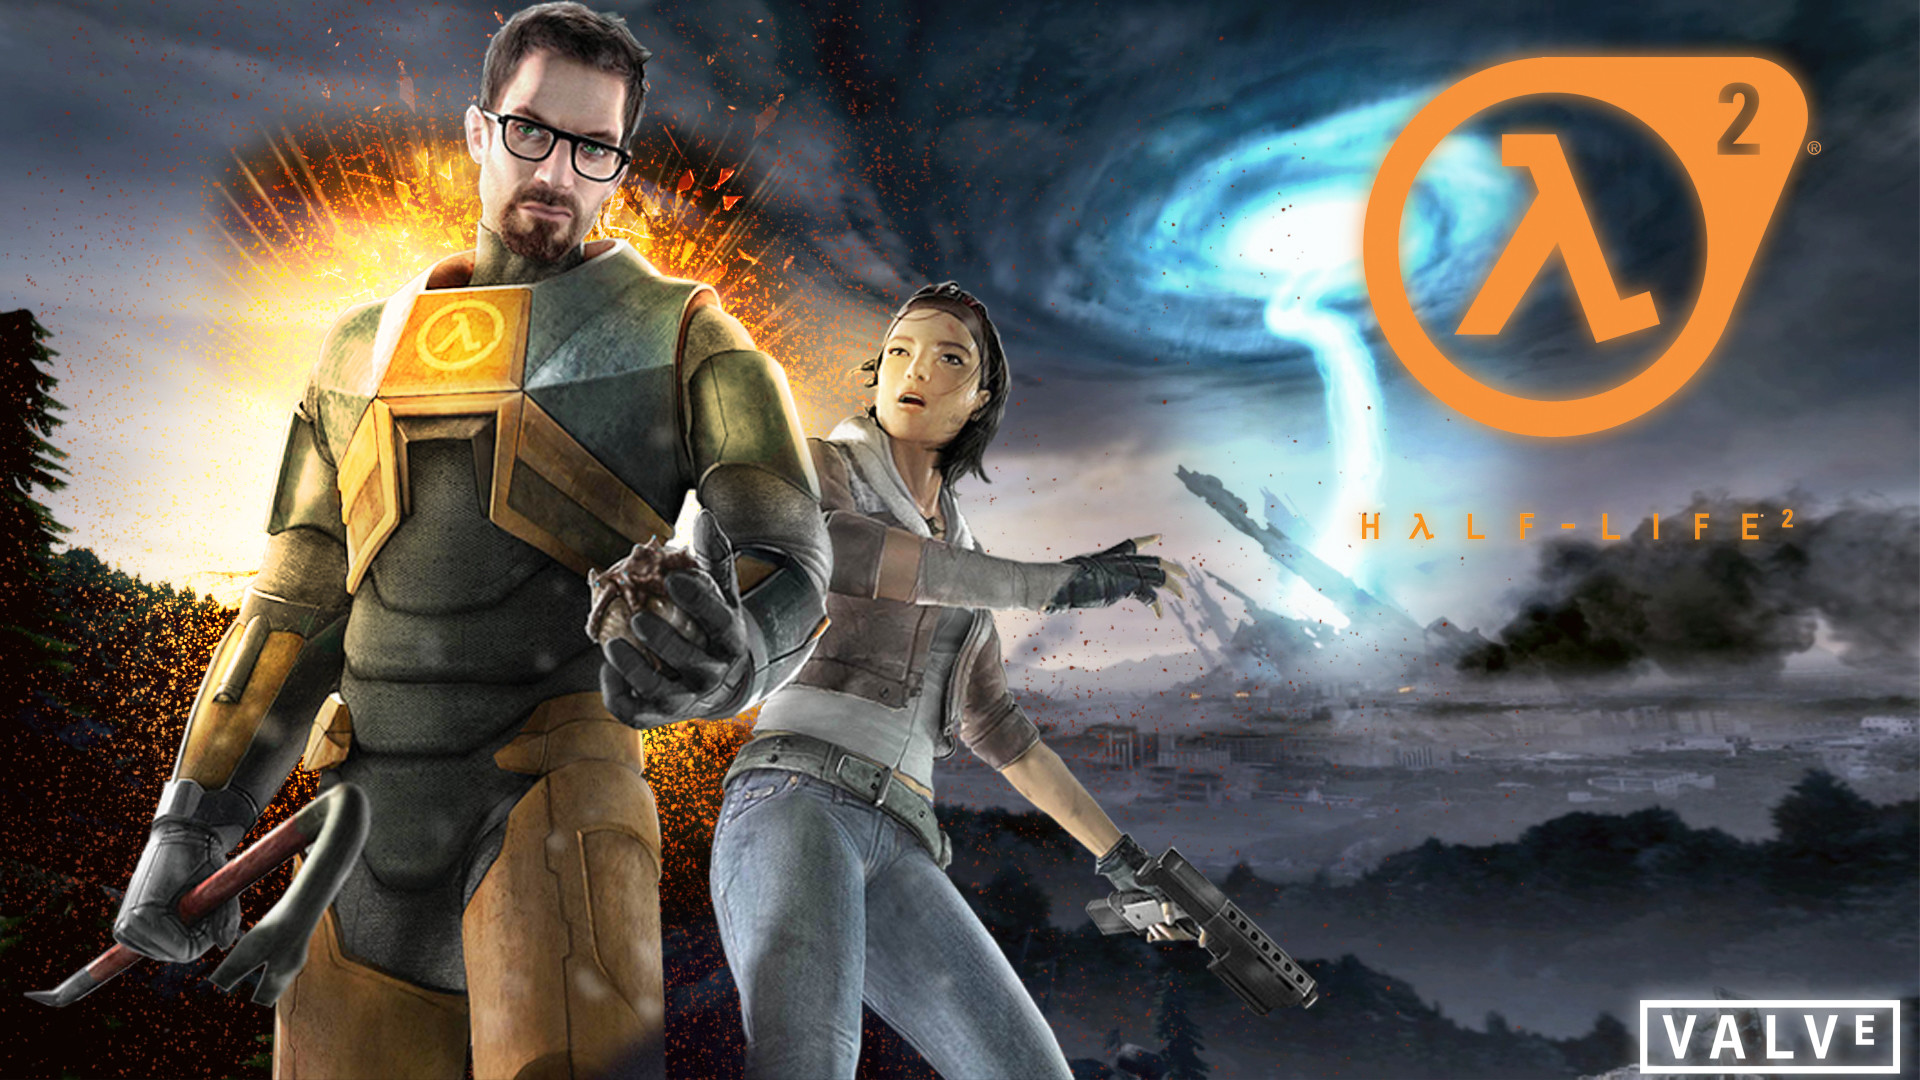 Half life 2 wallpaper my style by karl97885 d57ab51